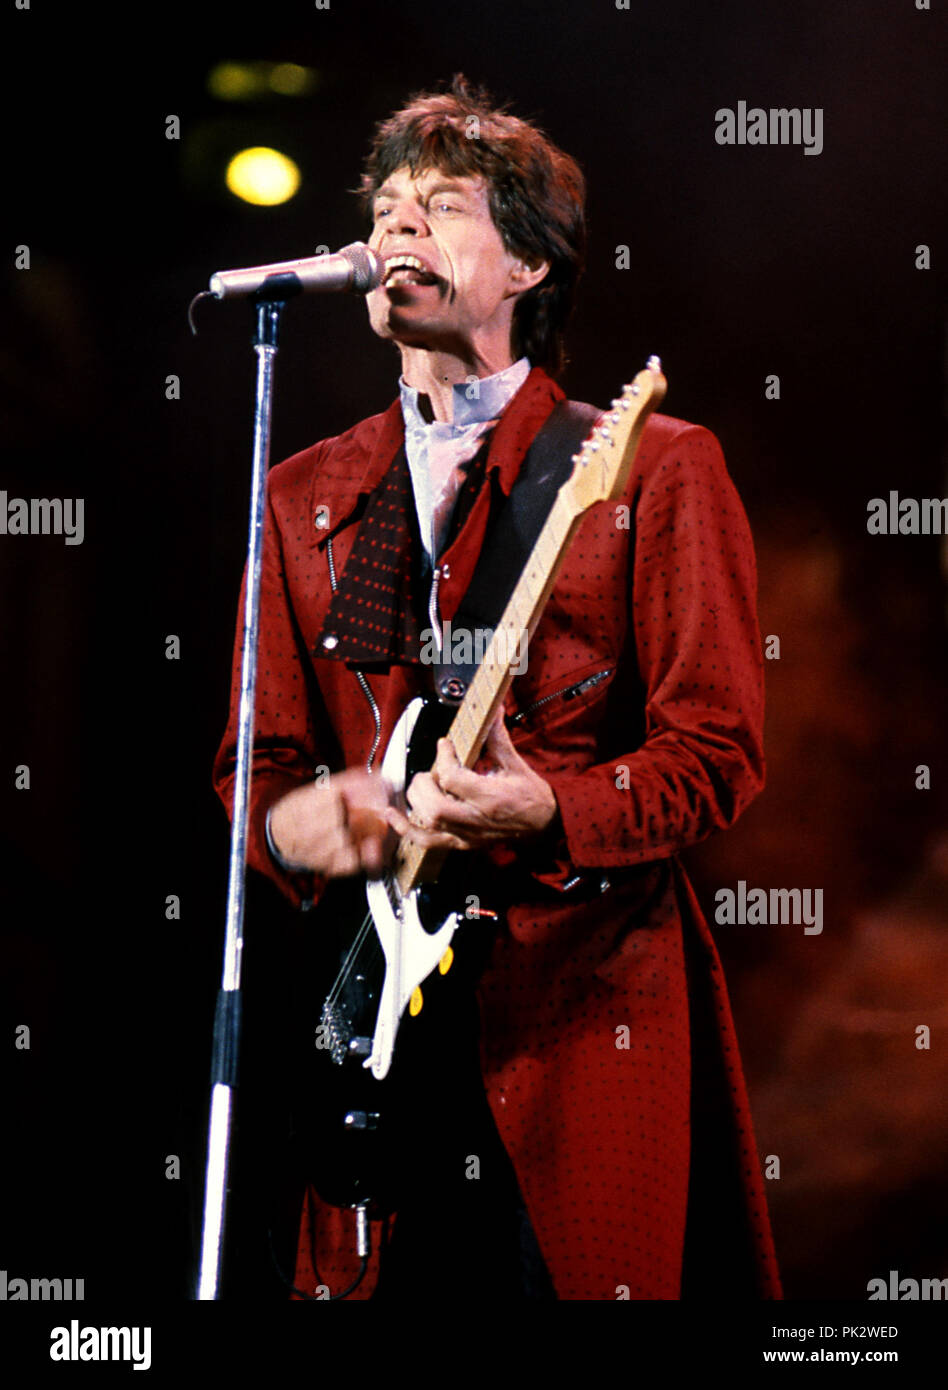 Rolling Stones - concert in 1990 - Mick Jagger | usage worldwide Stock  Photo - Alamy